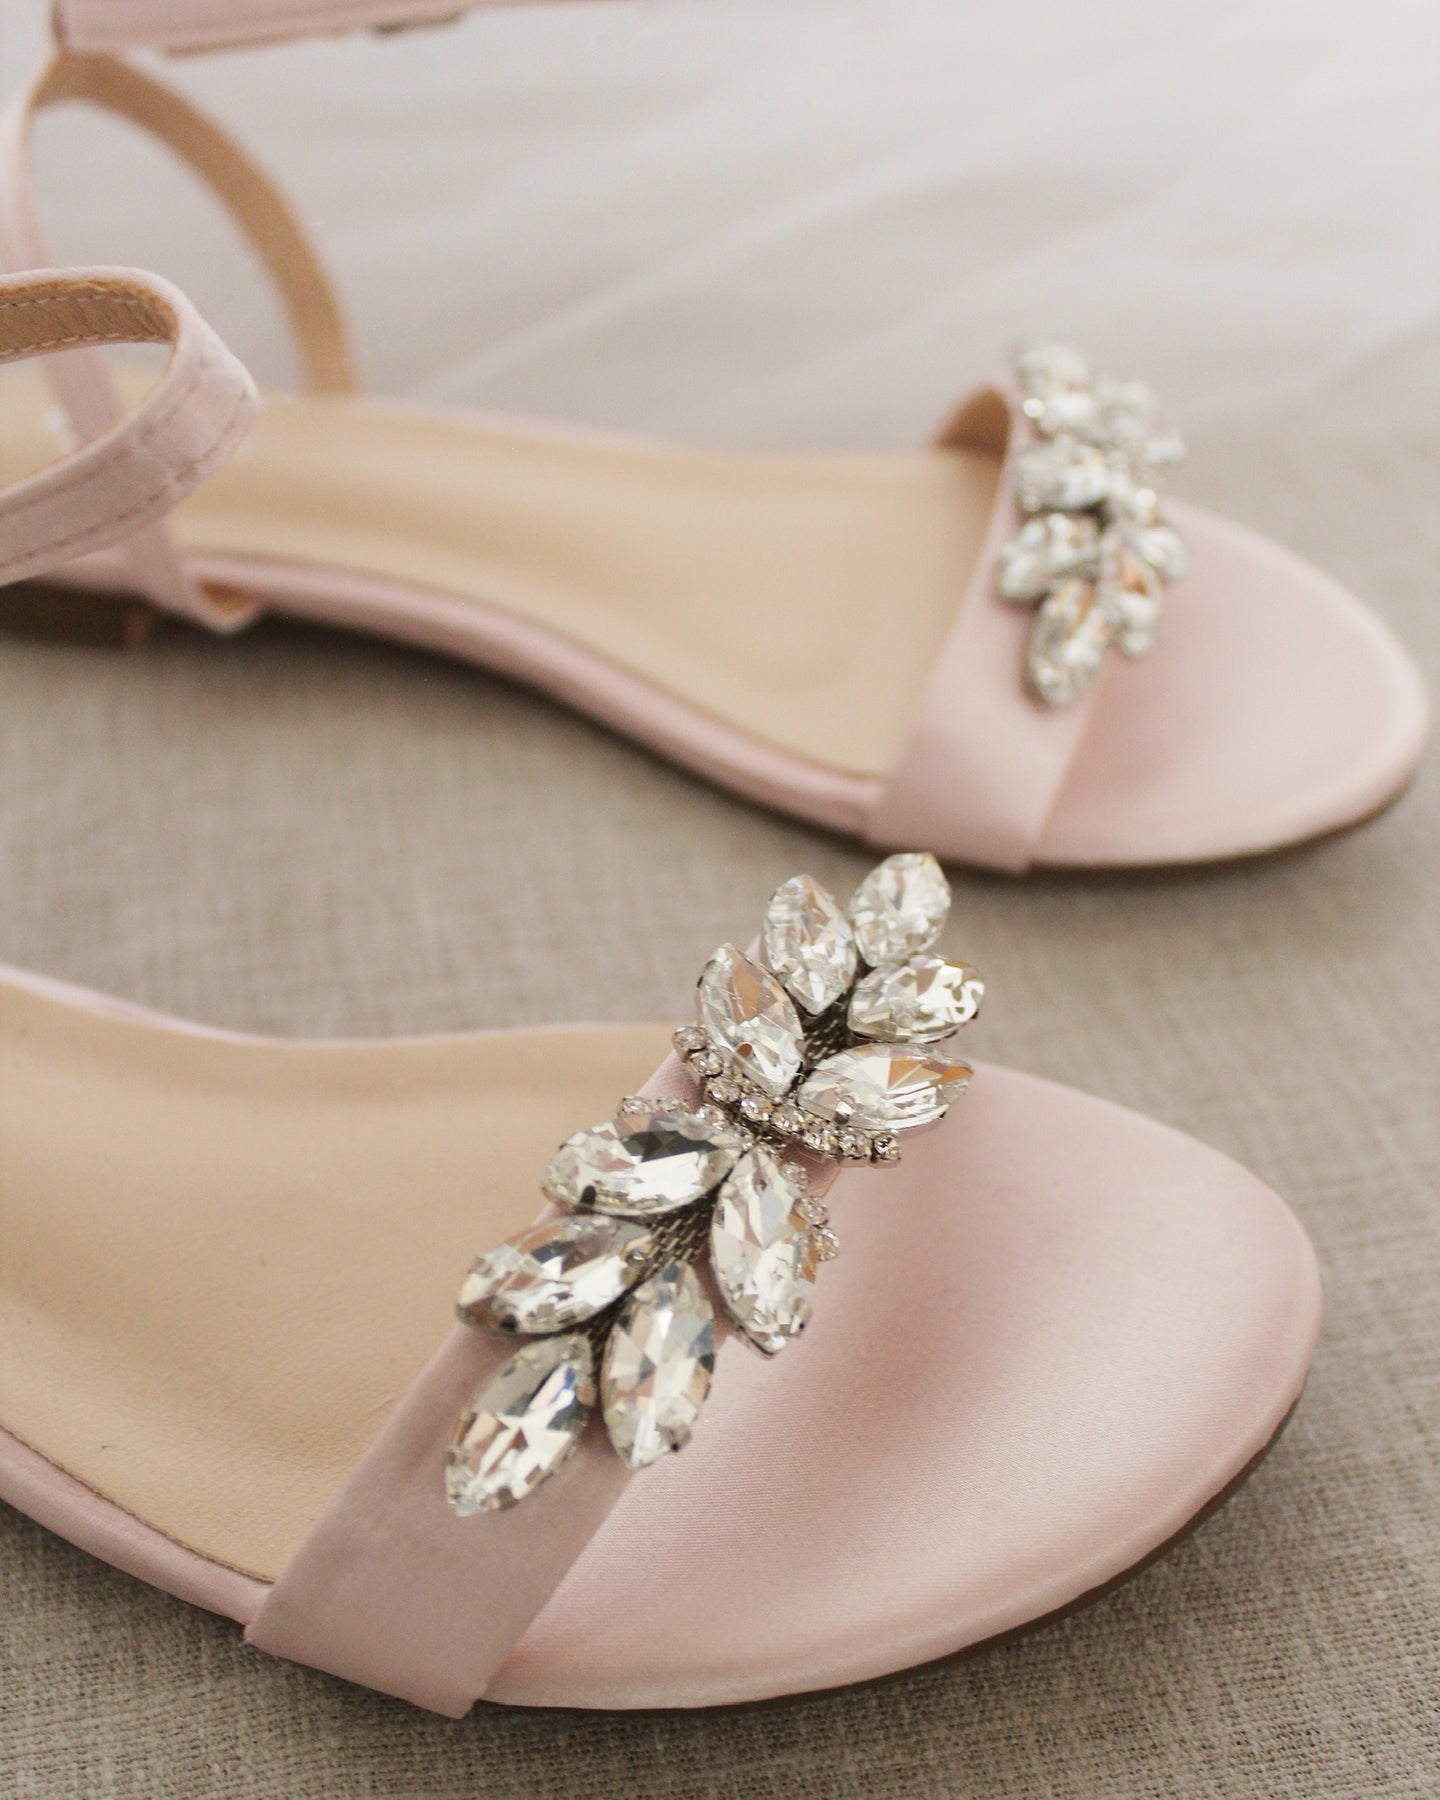 Pink Satin Flat Sandal with Butterfly Brooch and Ankle Strap ...